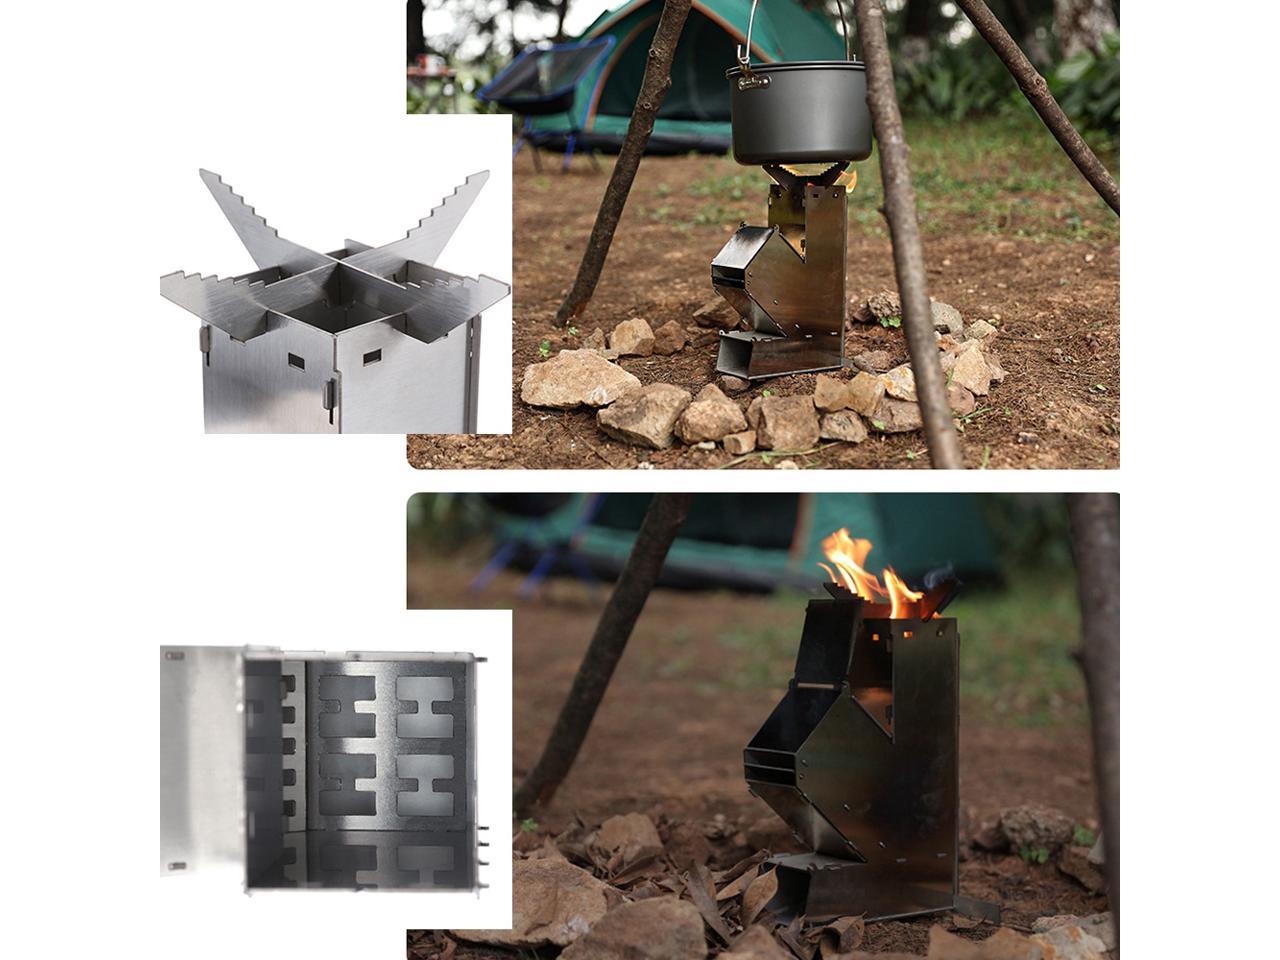 Details about   Outdoor Camping Wood Stove Portable Hiking Stainless Steel Folding Rocket Burner 